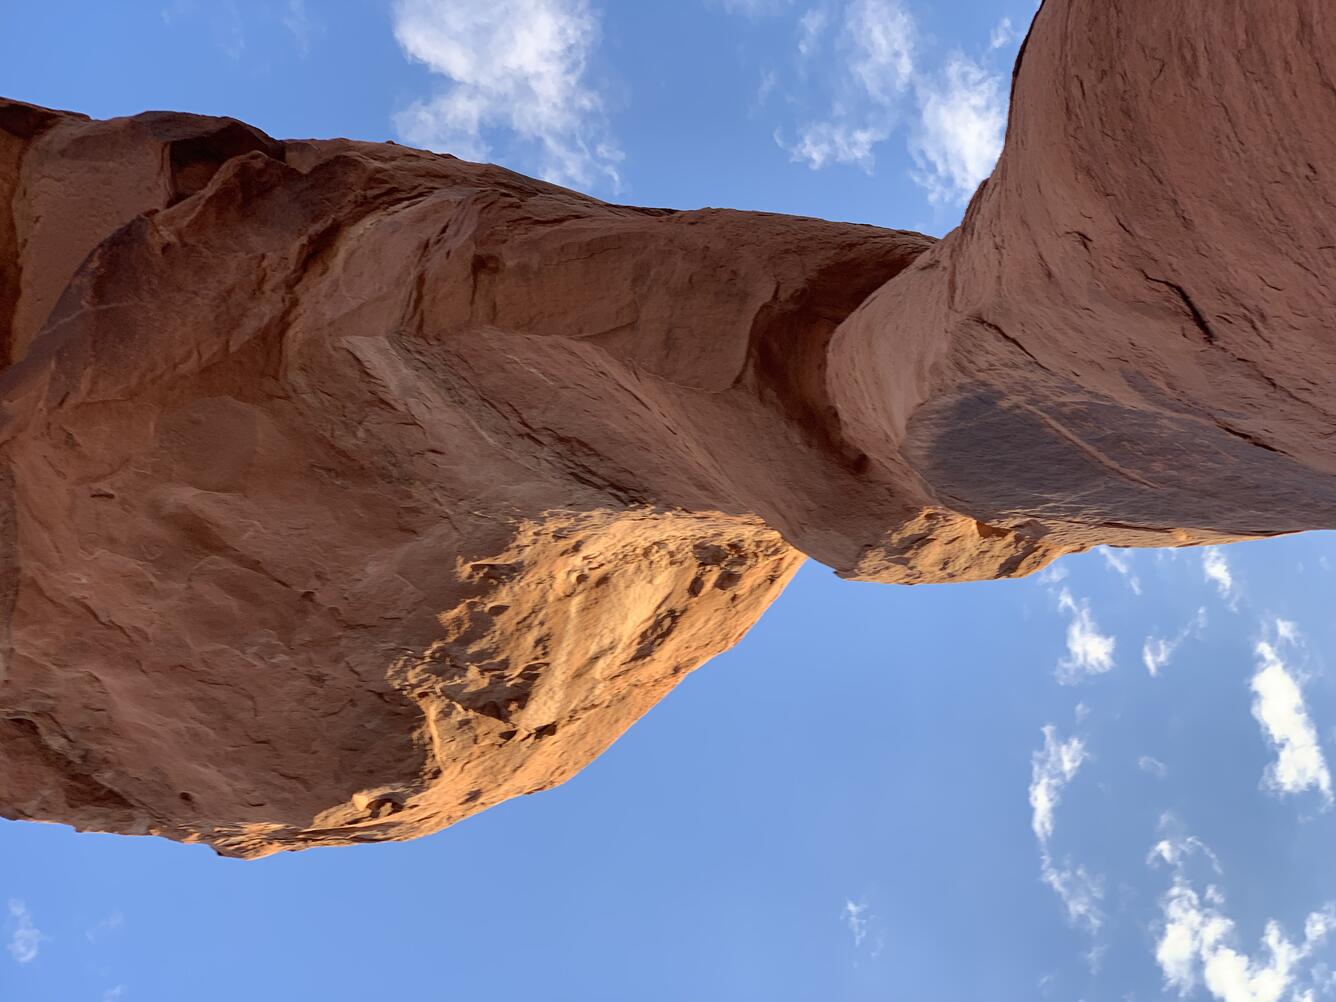 This image shows the under side of a red sandstone arch against a bright blue sy with a few white clouds.